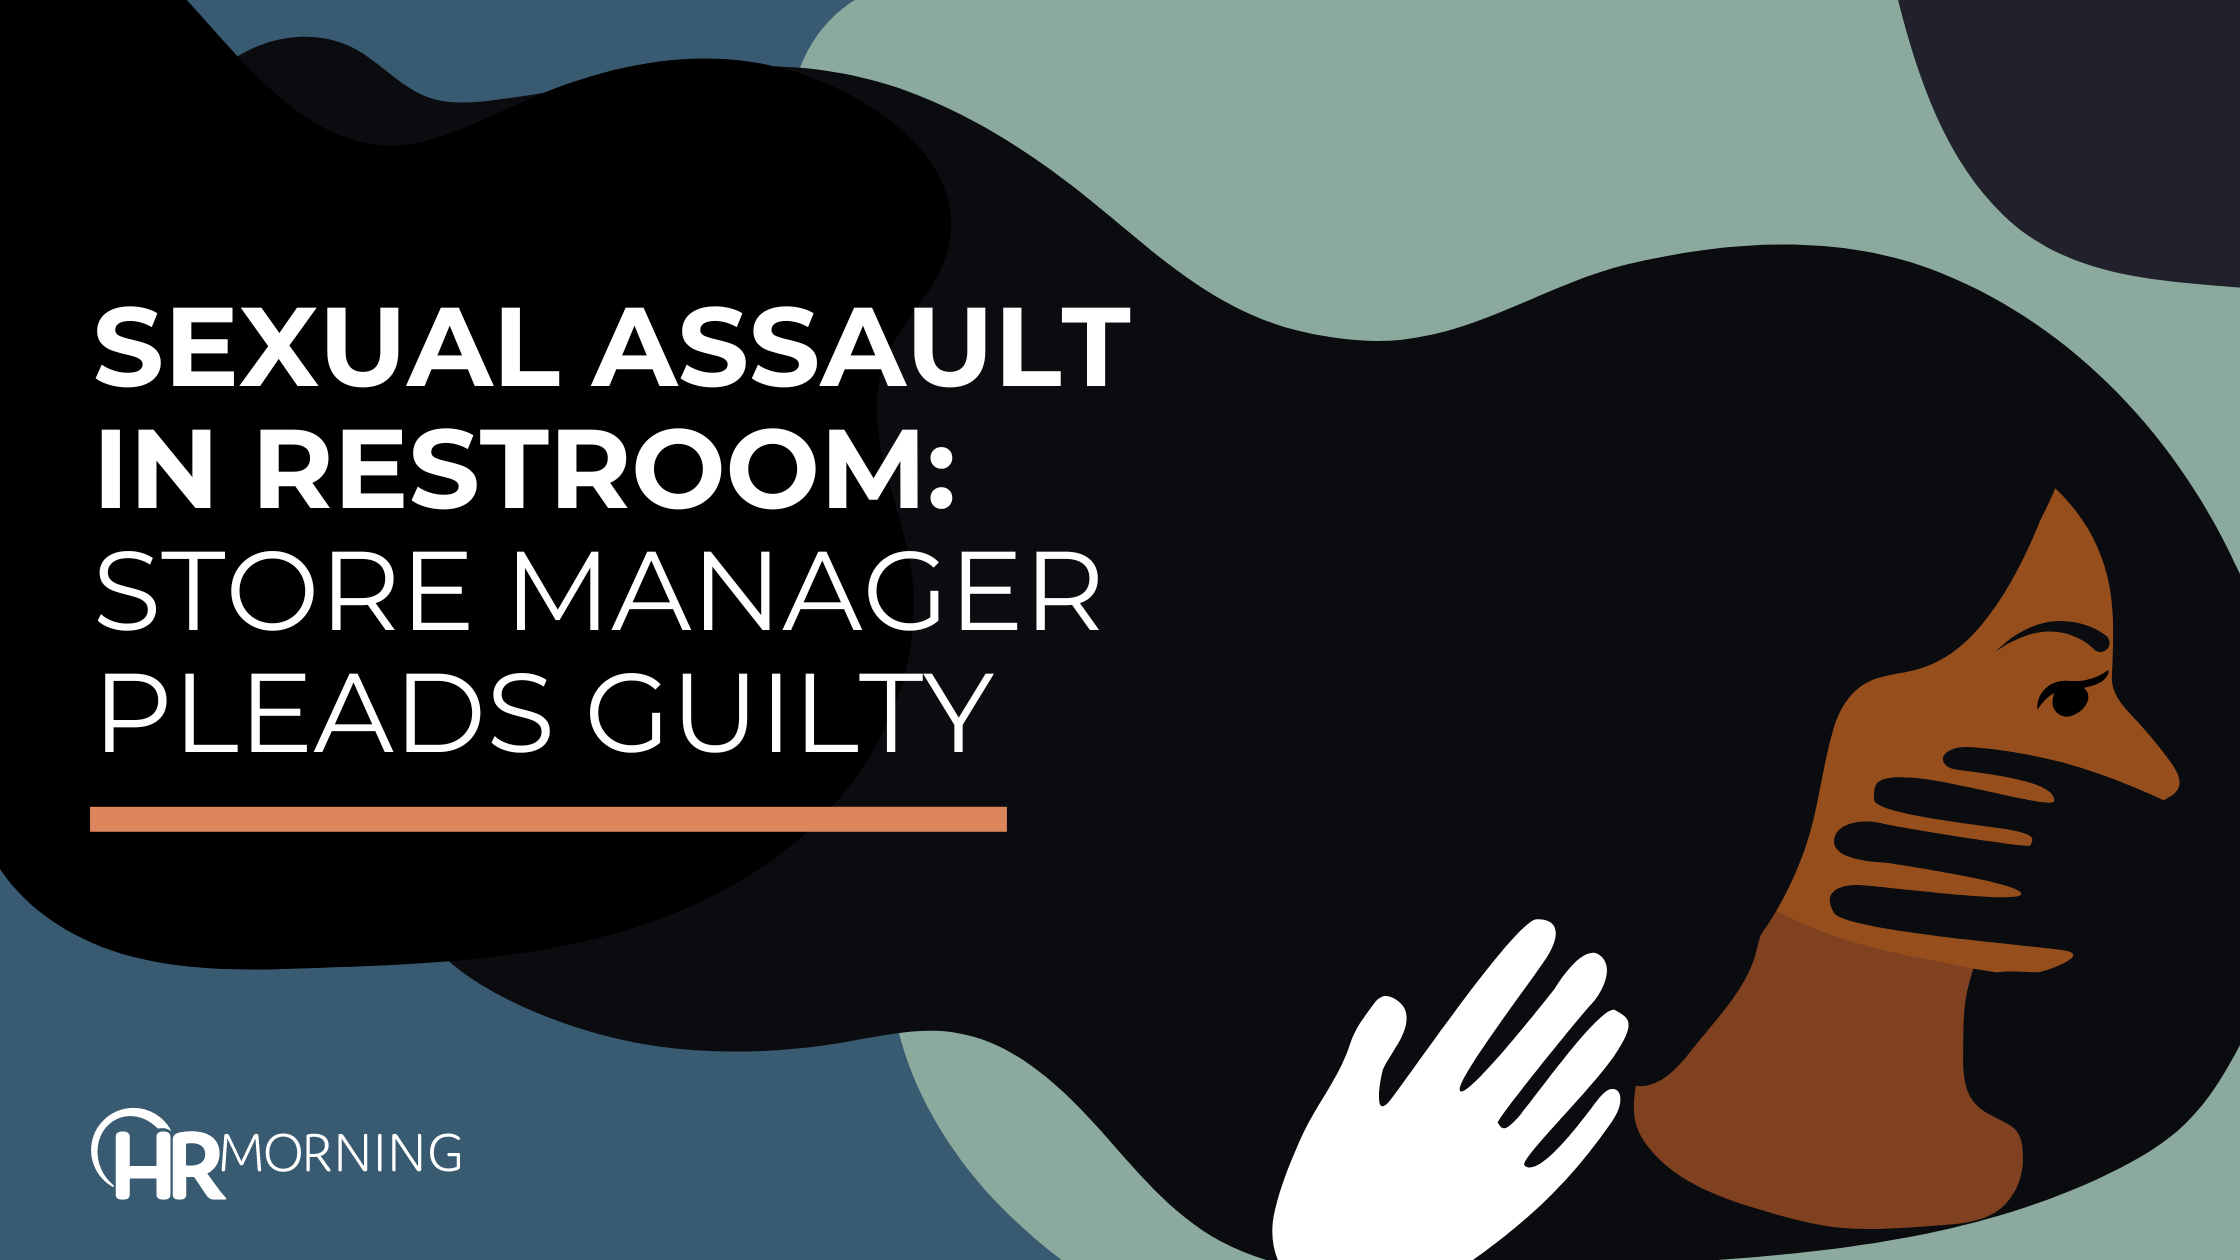 Sexual assault in restroom: Store manager pleads guilty